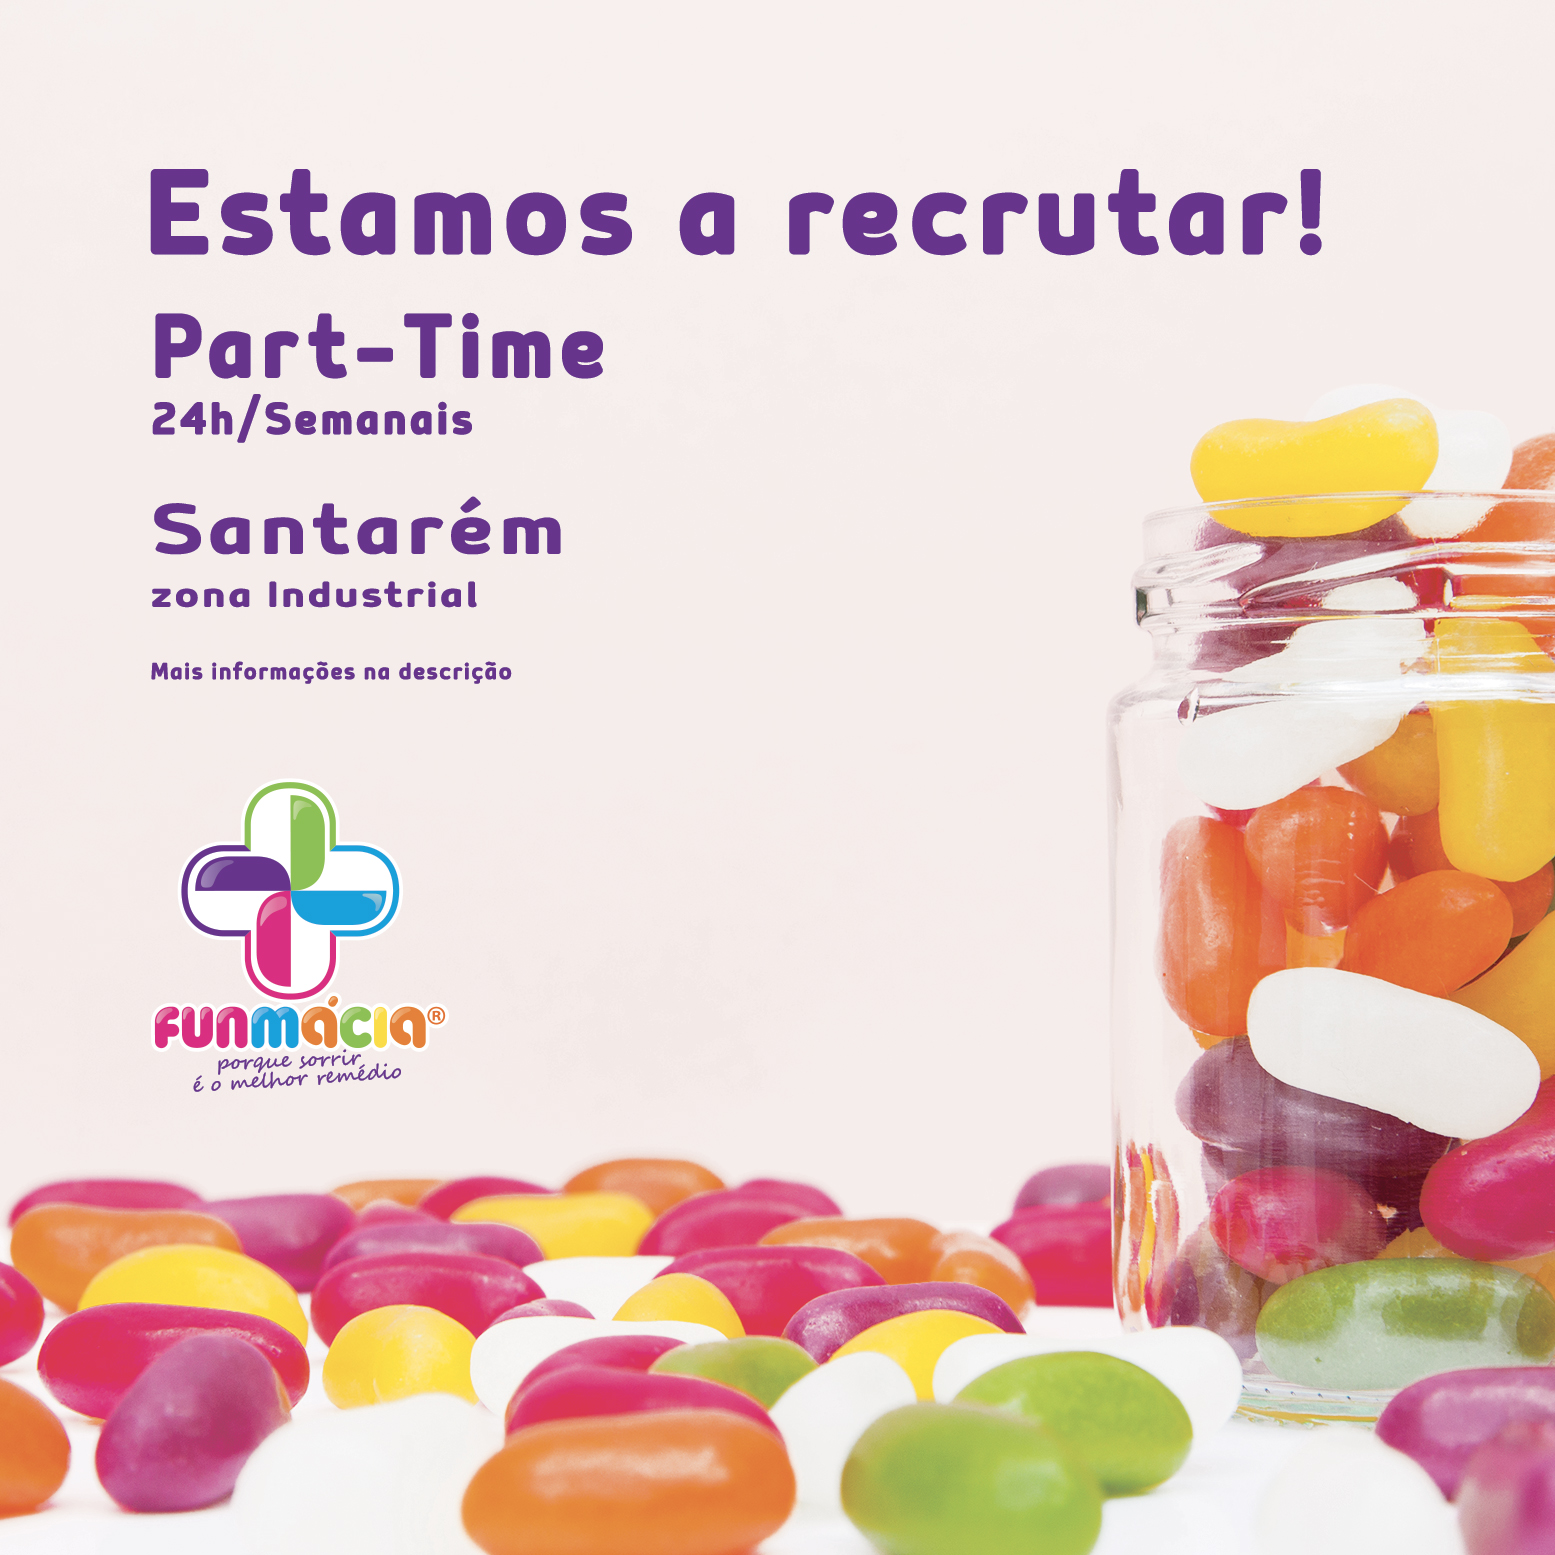 PART-TIME